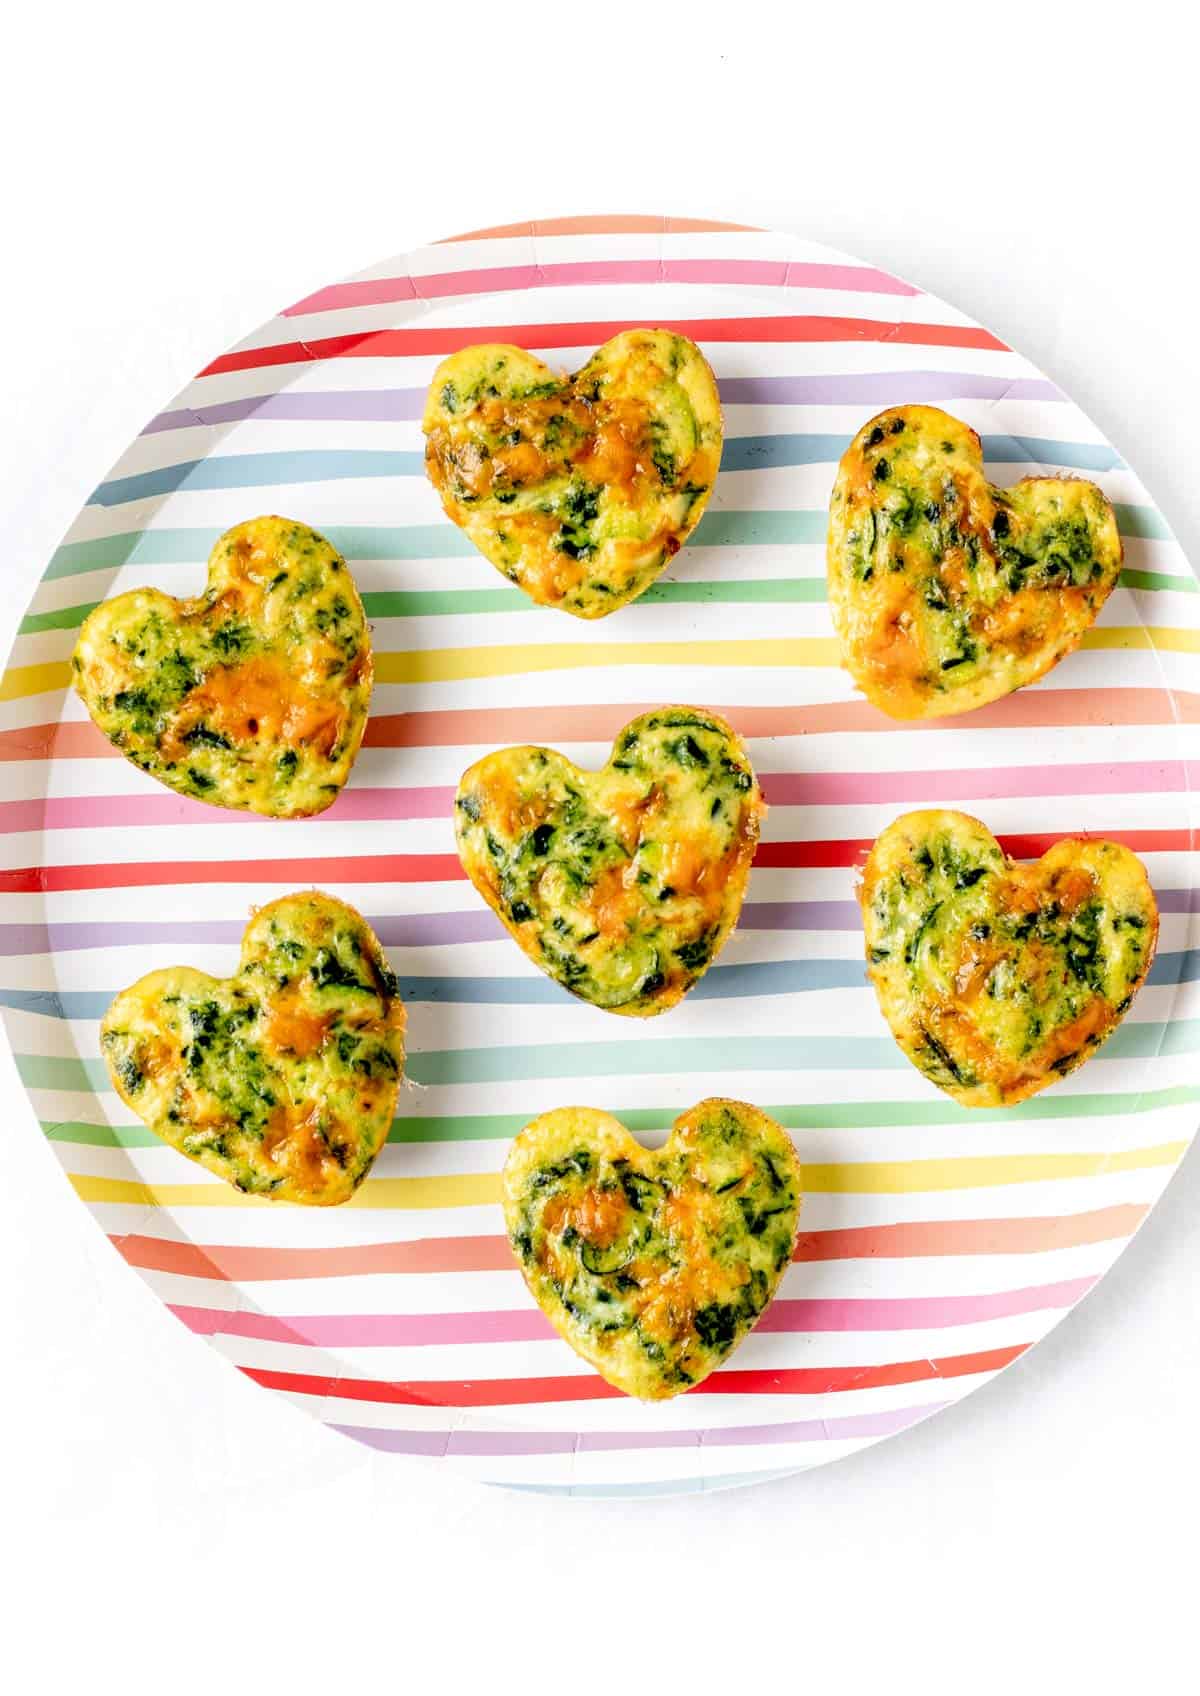 A birds-eye view of the zucchini frittata muffins on a striped plate.